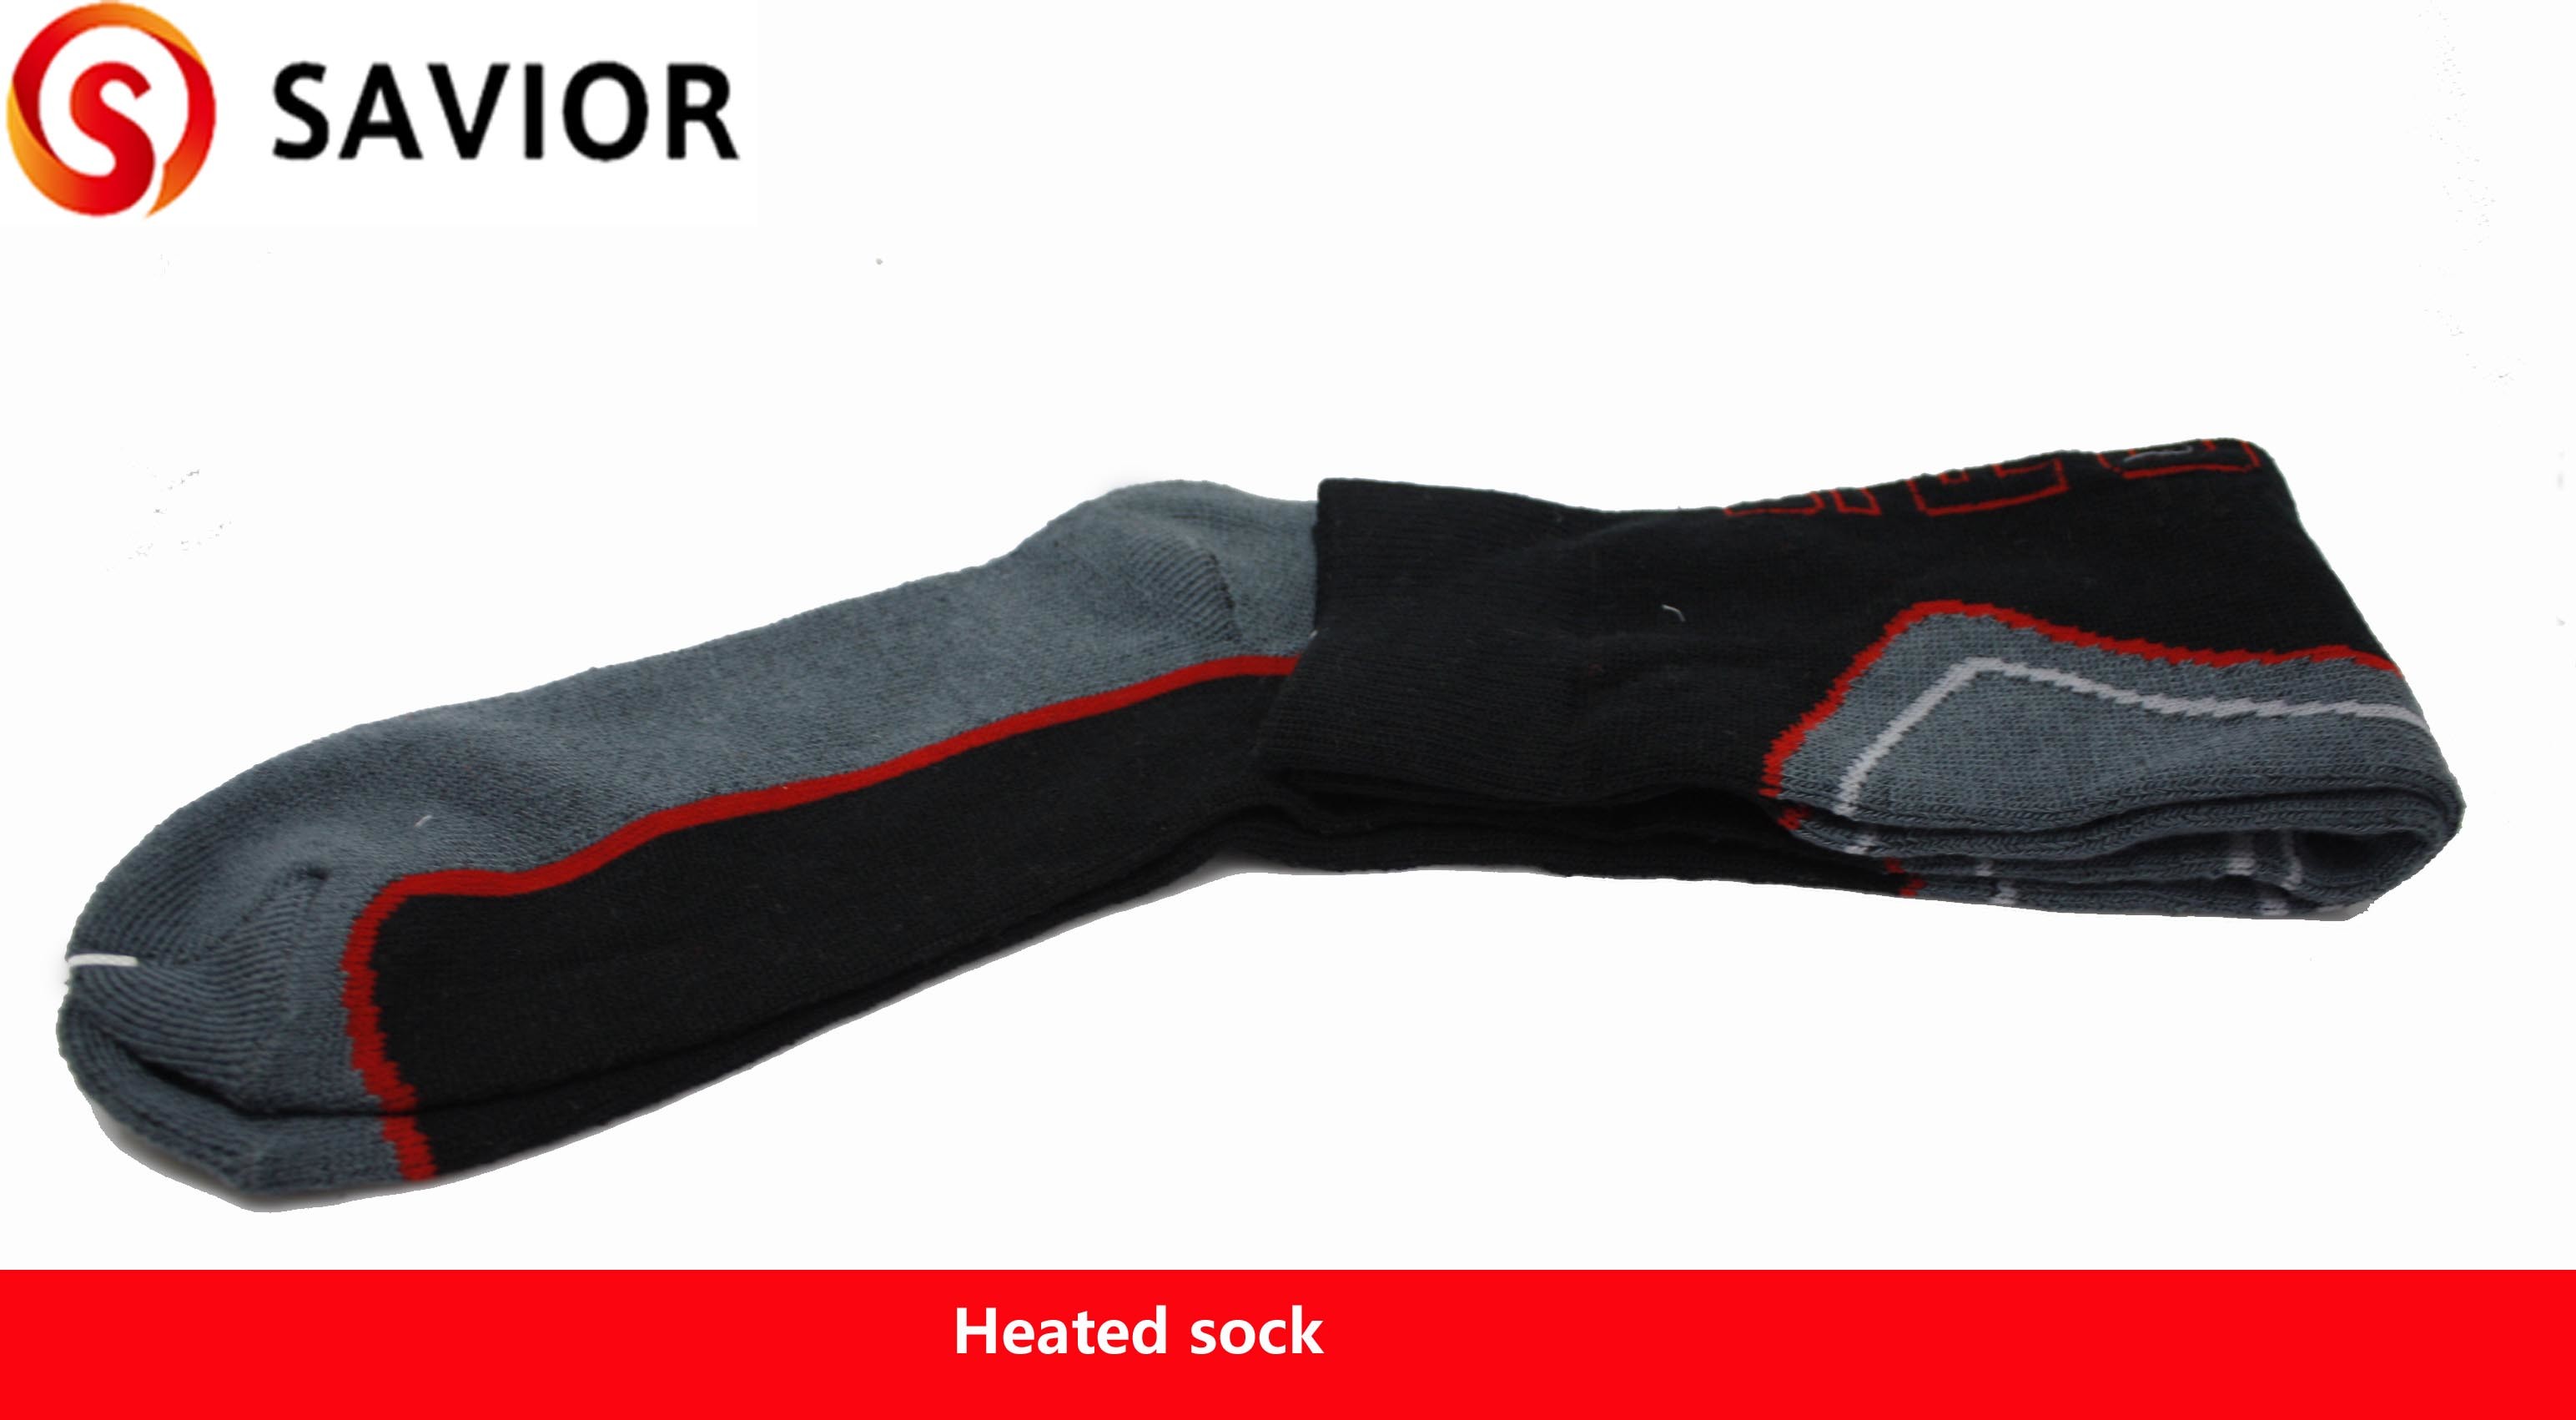 Electrical Rechargeable Heated Socks with 3 Levels Control